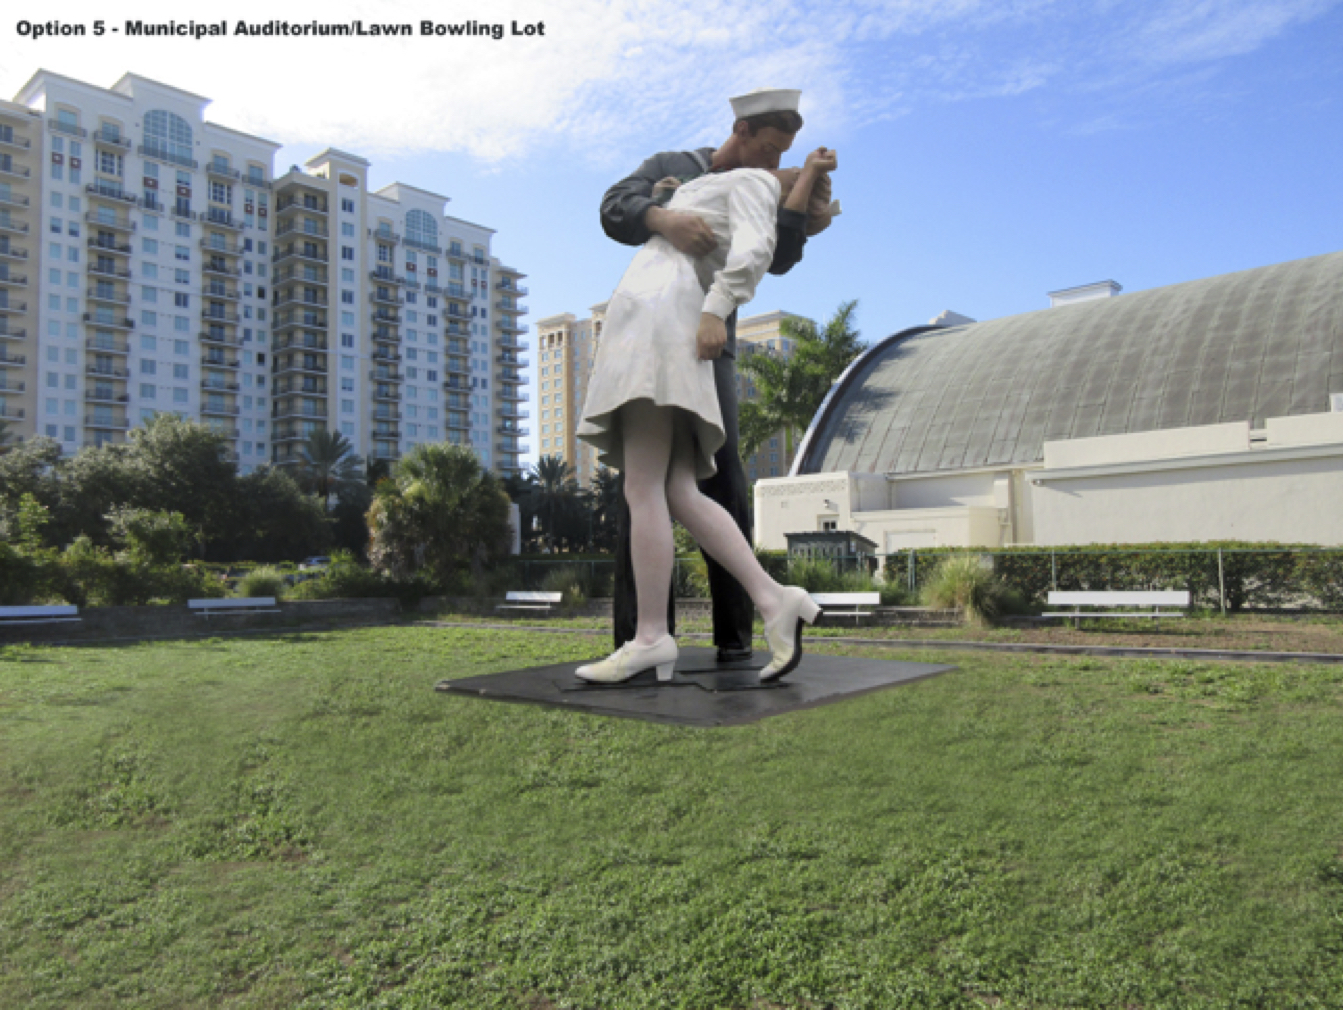 One of the alternatives offered by the city for Unconditional Surrender is a plot near the municipal auditorium. (courtesy photo)